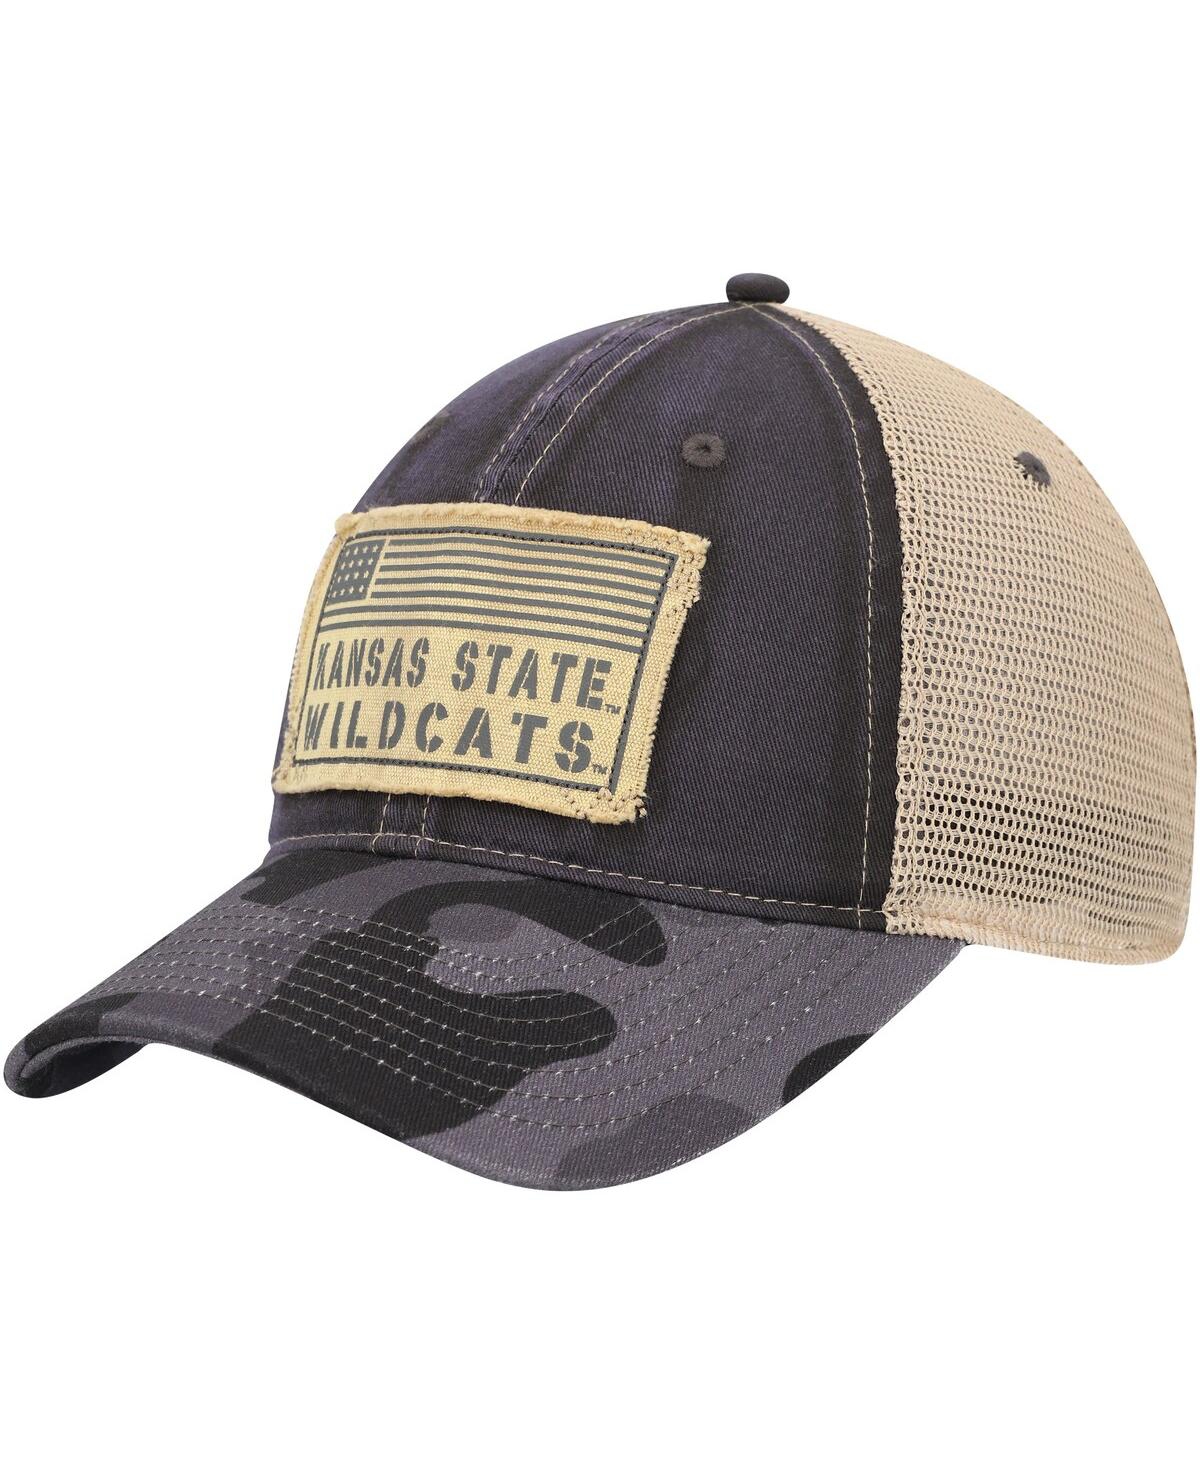 Colosseum Men's  Charcoal Kansas State Wildcats Oht Military-inspired Appreciation United Trucker Sna